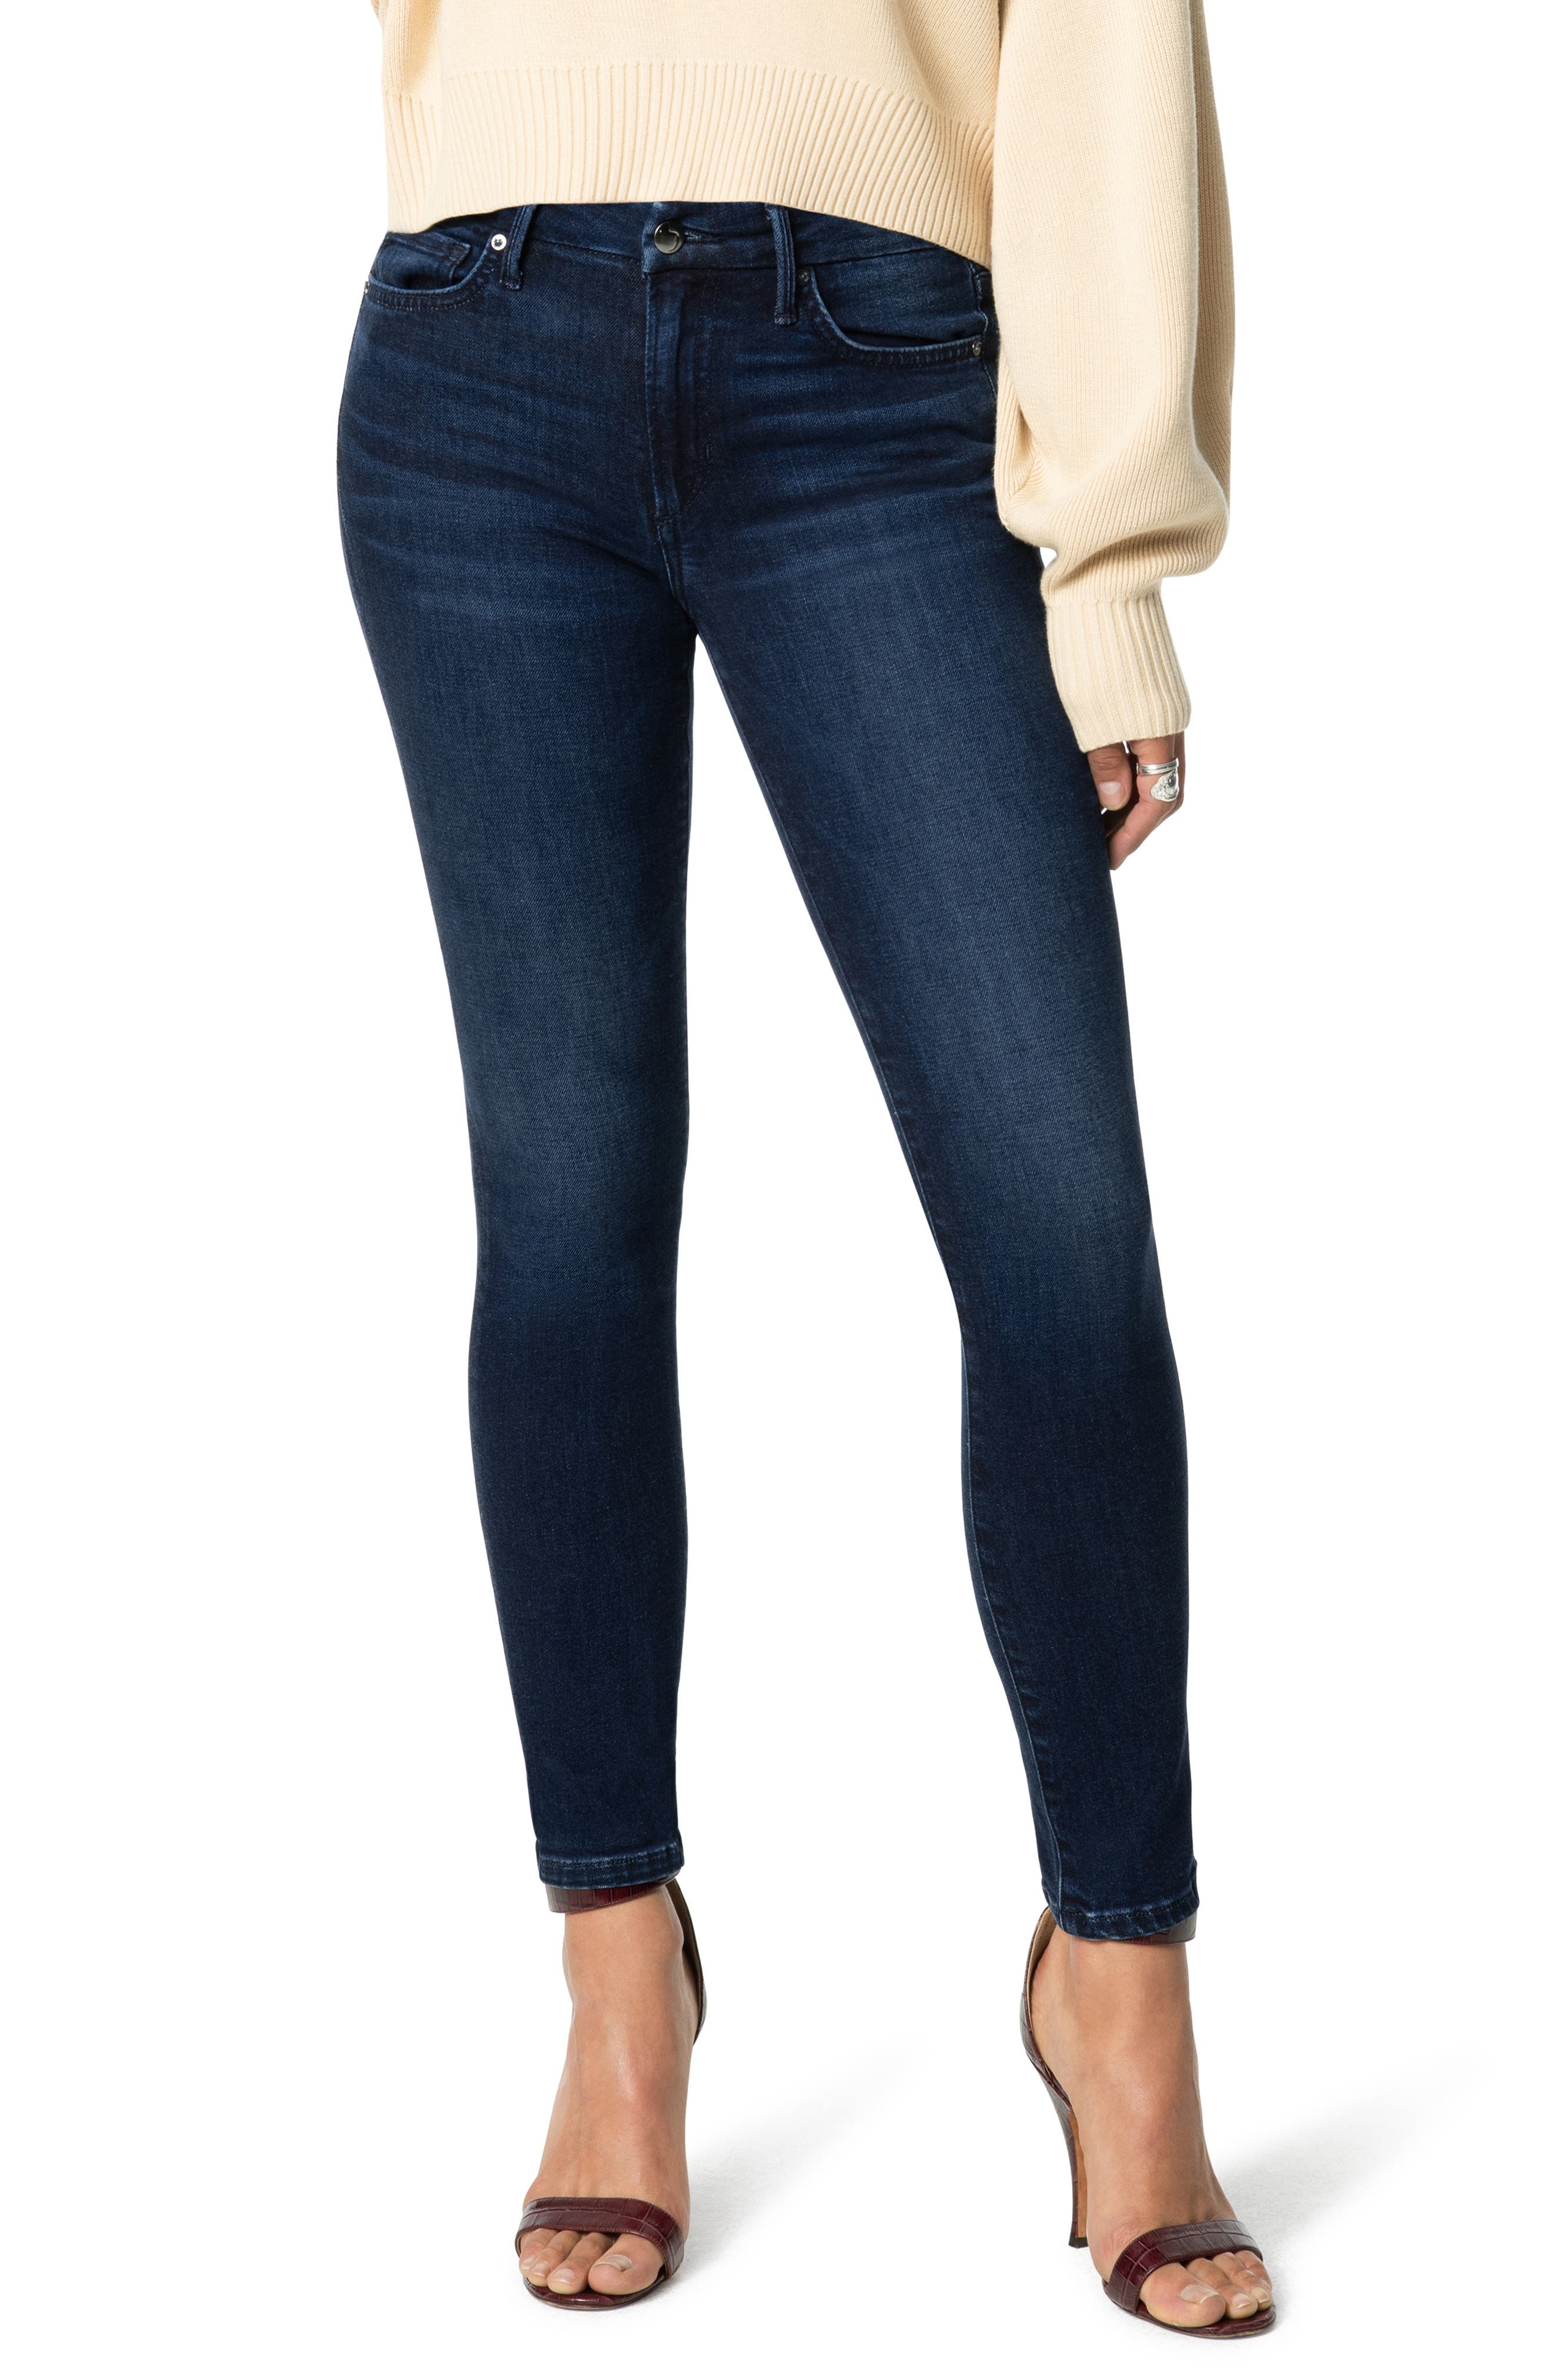 Joes Jeans Womens The Icon Skinny Maternity